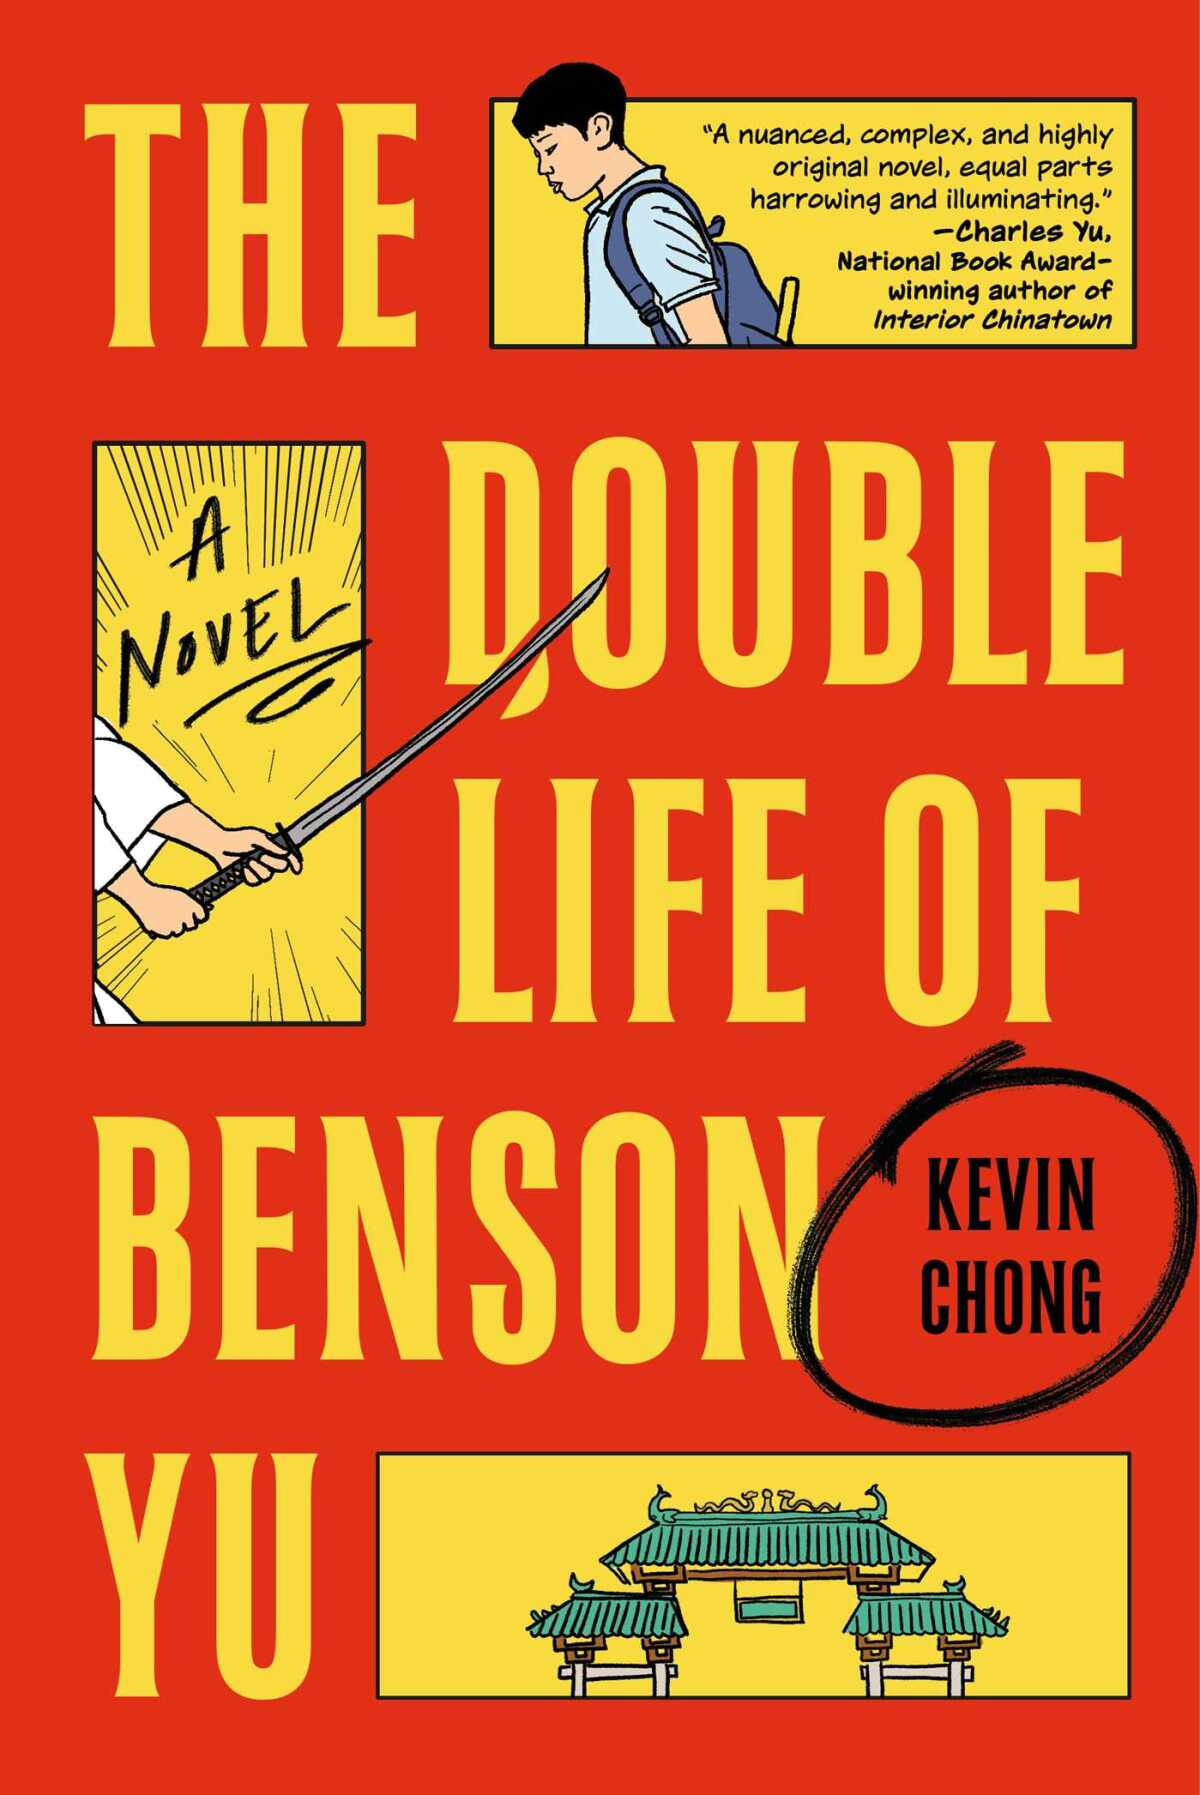 'The Double Life of Benson Yu,' by Kevin Chong